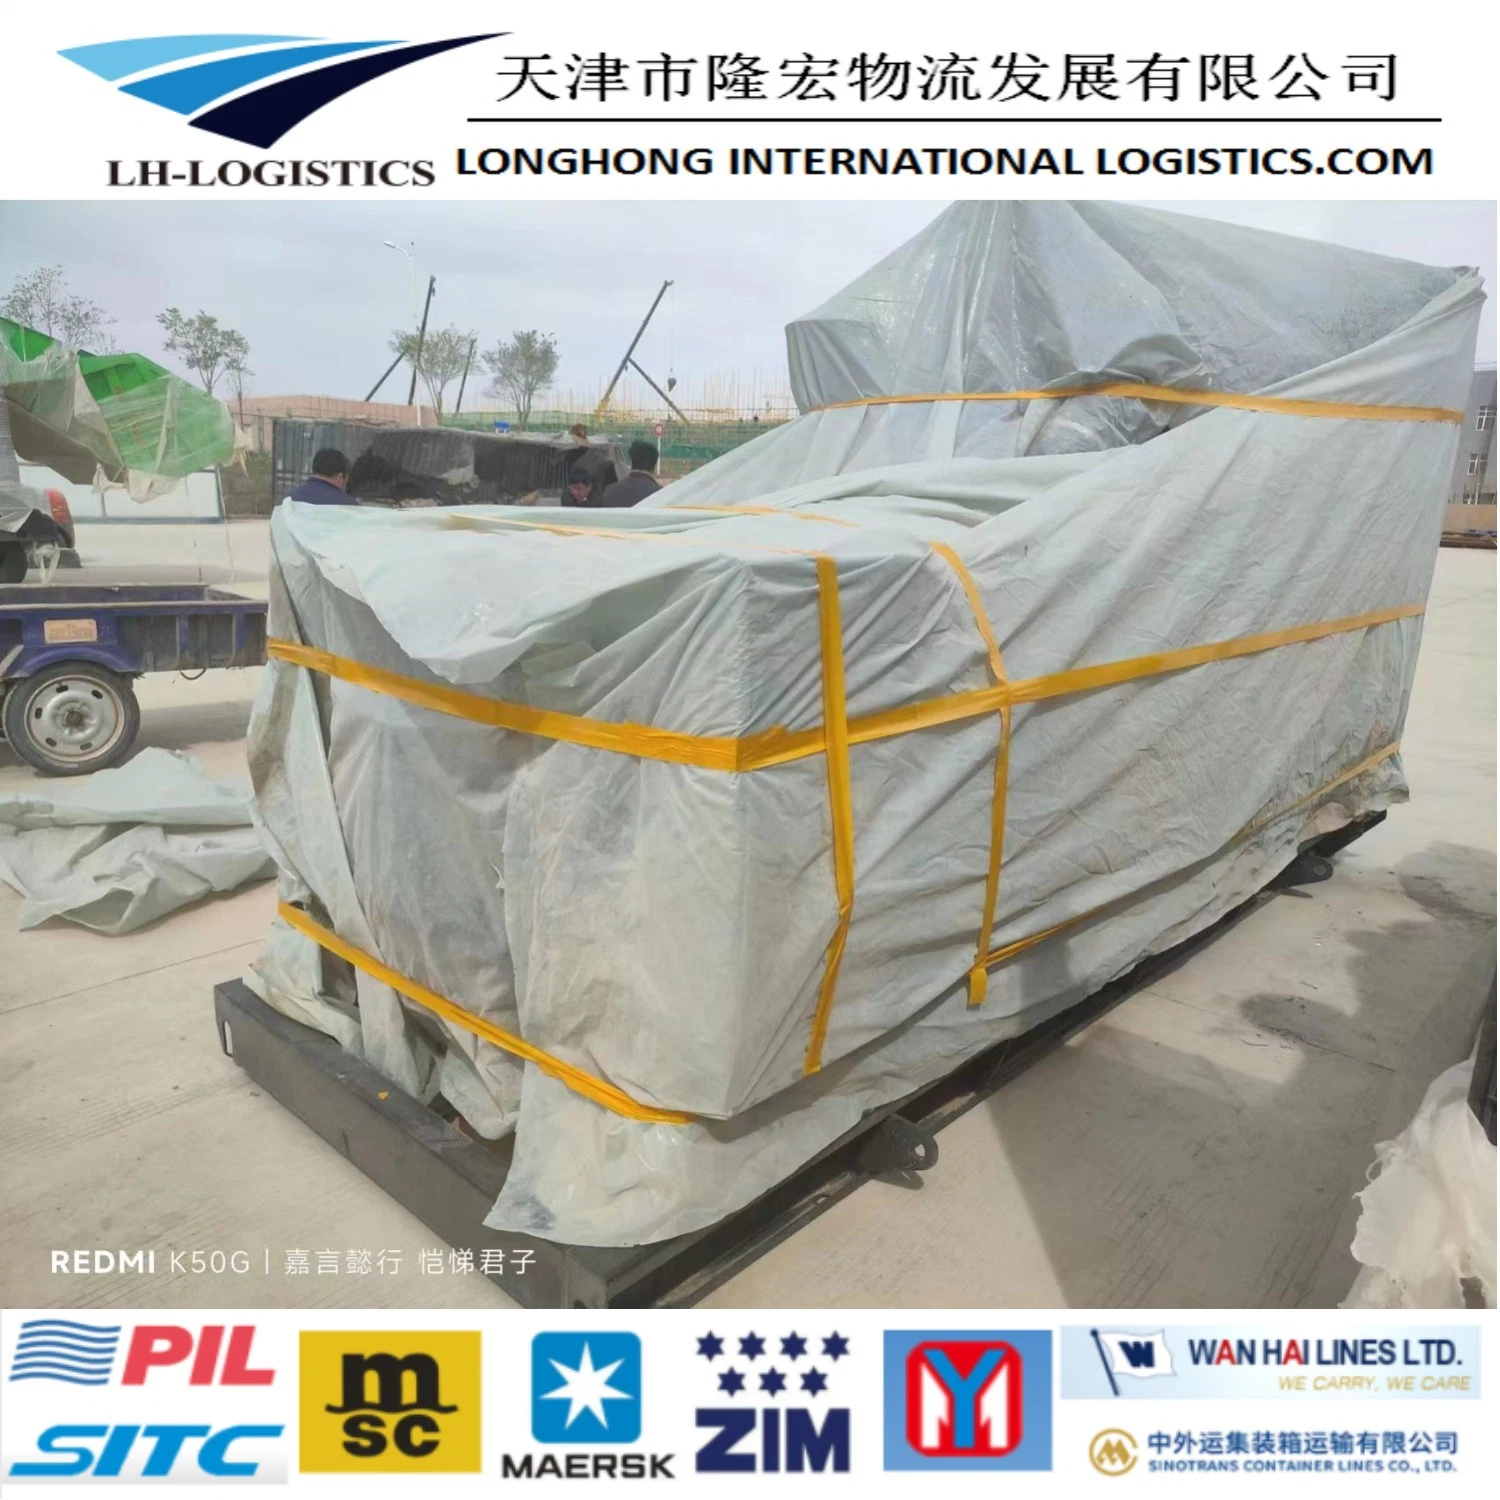 1688 Road Transportation Shipping From China to Uzbekistan, Container Cargo, Logistics